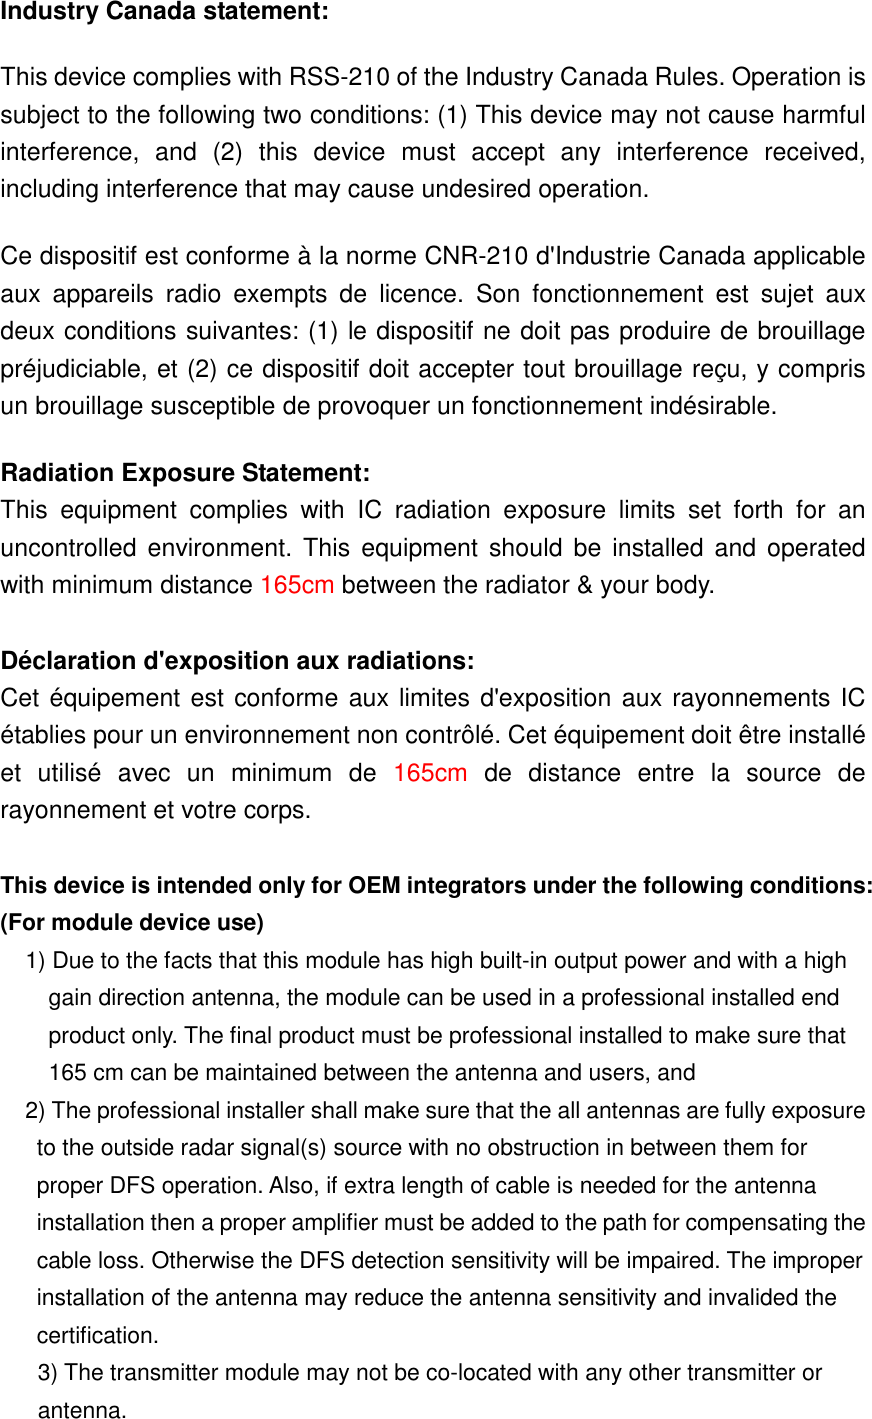 Industry Canada statement: This device complies with RSS-210 of the Industry Canada Rules. Operation is subject to the following two conditions: (1) This device may not cause harmful interference,  and  (2)  this  device  must  accept  any  interference  received, including interference that may cause undesired operation. Ce dispositif est conforme à la norme CNR-210 d&apos;Industrie Canada applicable aux  appareils  radio  exempts  de  licence.  Son  fonctionnement  est  sujet  aux deux conditions suivantes: (1) le dispositif ne doit pas produire de brouillage préjudiciable, et (2) ce dispositif doit accepter tout brouillage reçu, y compris un brouillage susceptible de provoquer un fonctionnement indésirable.   Radiation Exposure Statement: This  equipment  complies  with  IC  radiation  exposure  limits  set  forth  for  an uncontrolled  environment.  This  equipment  should  be  installed and  operated with minimum distance 165cm between the radiator &amp; your body.  Déclaration d&apos;exposition aux radiations: Cet équipement est conforme aux limites d&apos;exposition aux rayonnements IC établies pour un environnement non contrôlé. Cet équipement doit être installé et  utilisé  avec  un  minimum  de  165cm  de  distance  entre  la  source  de rayonnement et votre corps.  This device is intended only for OEM integrators under the following conditions: (For module device use) 1) Due to the facts that this module has high built-in output power and with a high gain direction antenna, the module can be used in a professional installed end product only. The final product must be professional installed to make sure that 165 cm can be maintained between the antenna and users, and 2) The professional installer shall make sure that the all antennas are fully exposure to the outside radar signal(s) source with no obstruction in between them for proper DFS operation. Also, if extra length of cable is needed for the antenna installation then a proper amplifier must be added to the path for compensating the cable loss. Otherwise the DFS detection sensitivity will be impaired. The improper installation of the antenna may reduce the antenna sensitivity and invalided the certification.   3) The transmitter module may not be co-located with any other transmitter or antenna. 